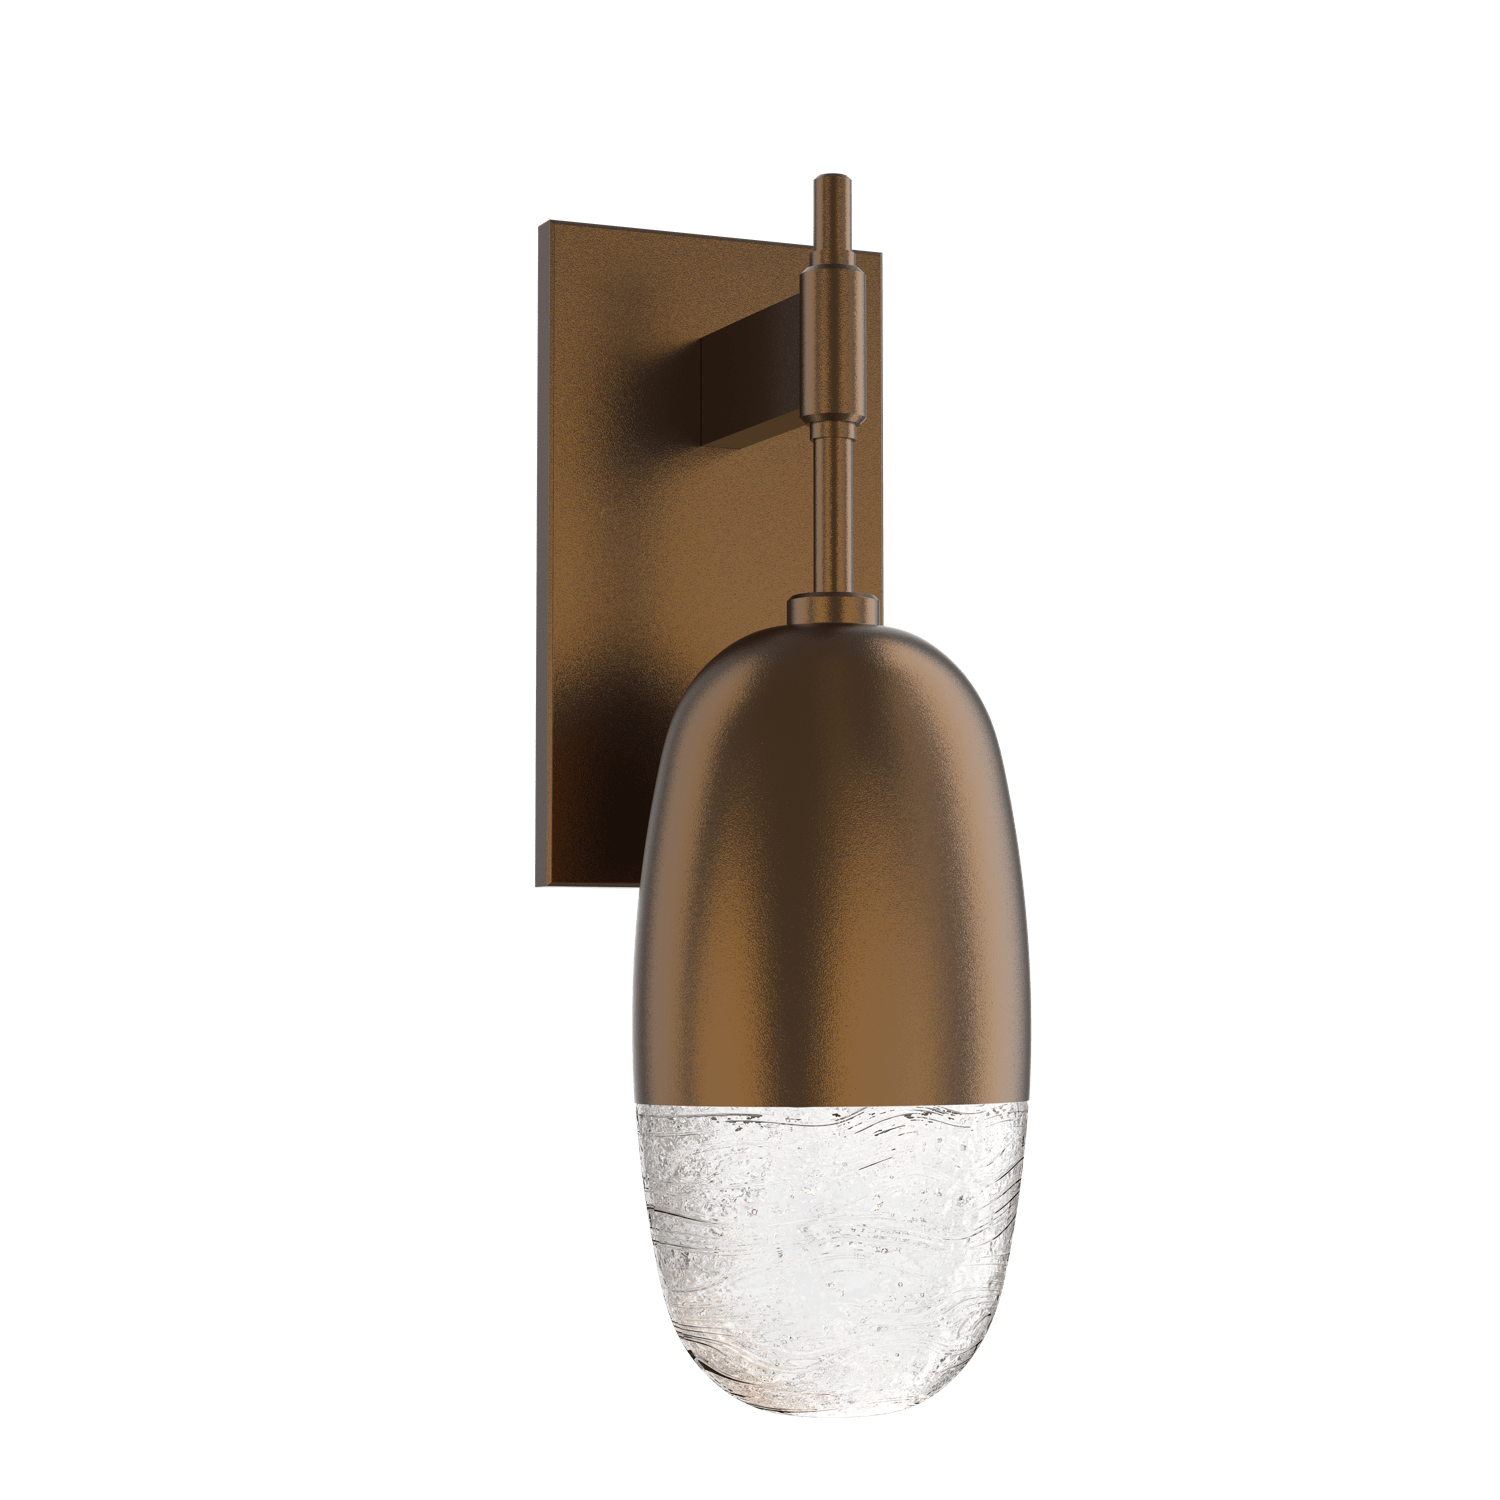 IDB0079-01-FB-Hammerton-Studio-Pebble-wall-sconce-with-flat-bronze-finish-and-clear-cast-glass-shades-and-LED-lamping